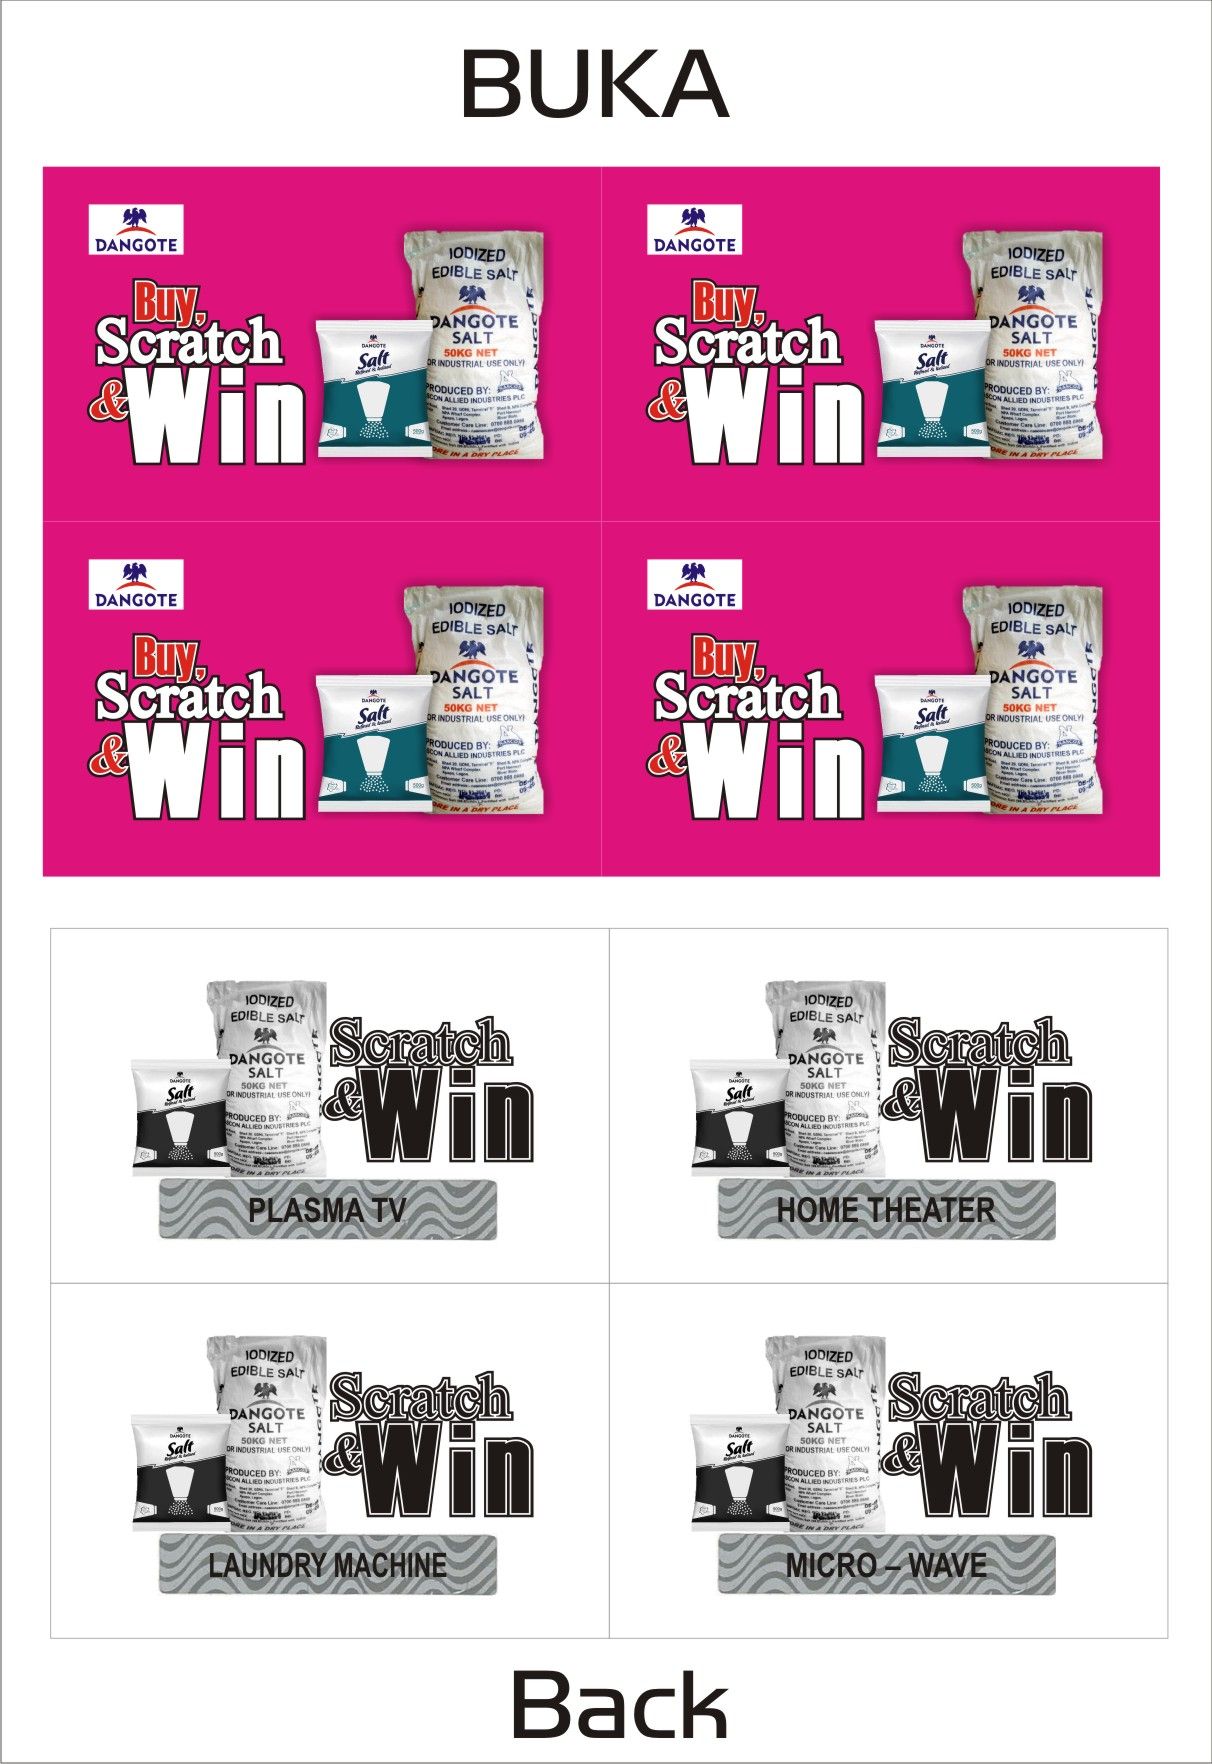 CALL CHINEDU ON 09022536974 TO PRINT SCRATCH AND WIN PROMO CARDS